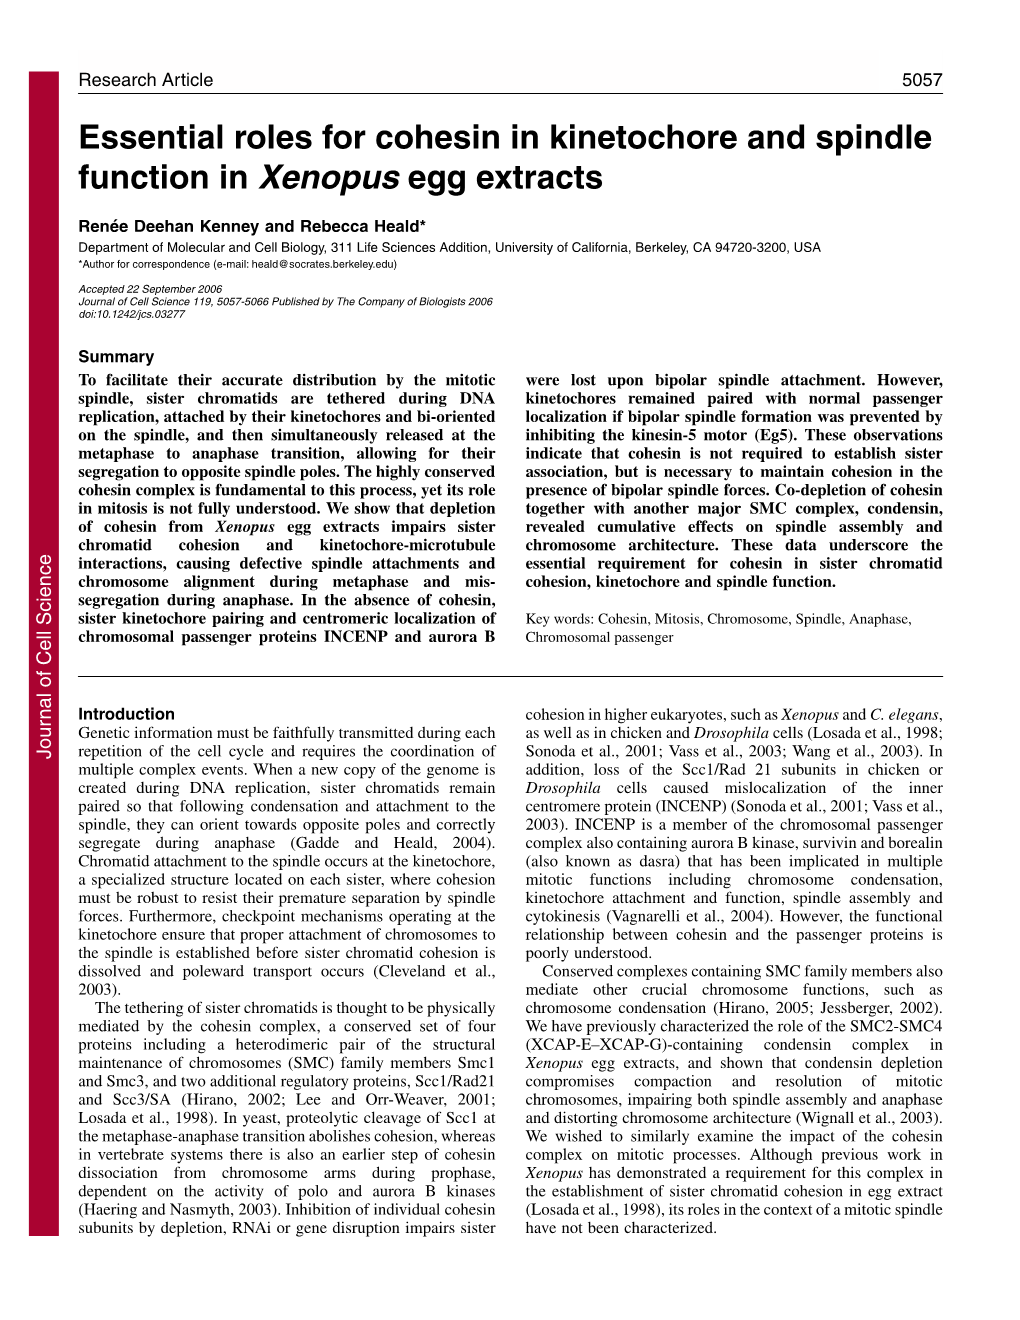 Essential Roles for Cohesin in Kinetochore and Spindle Function in Xenopus Egg Extracts